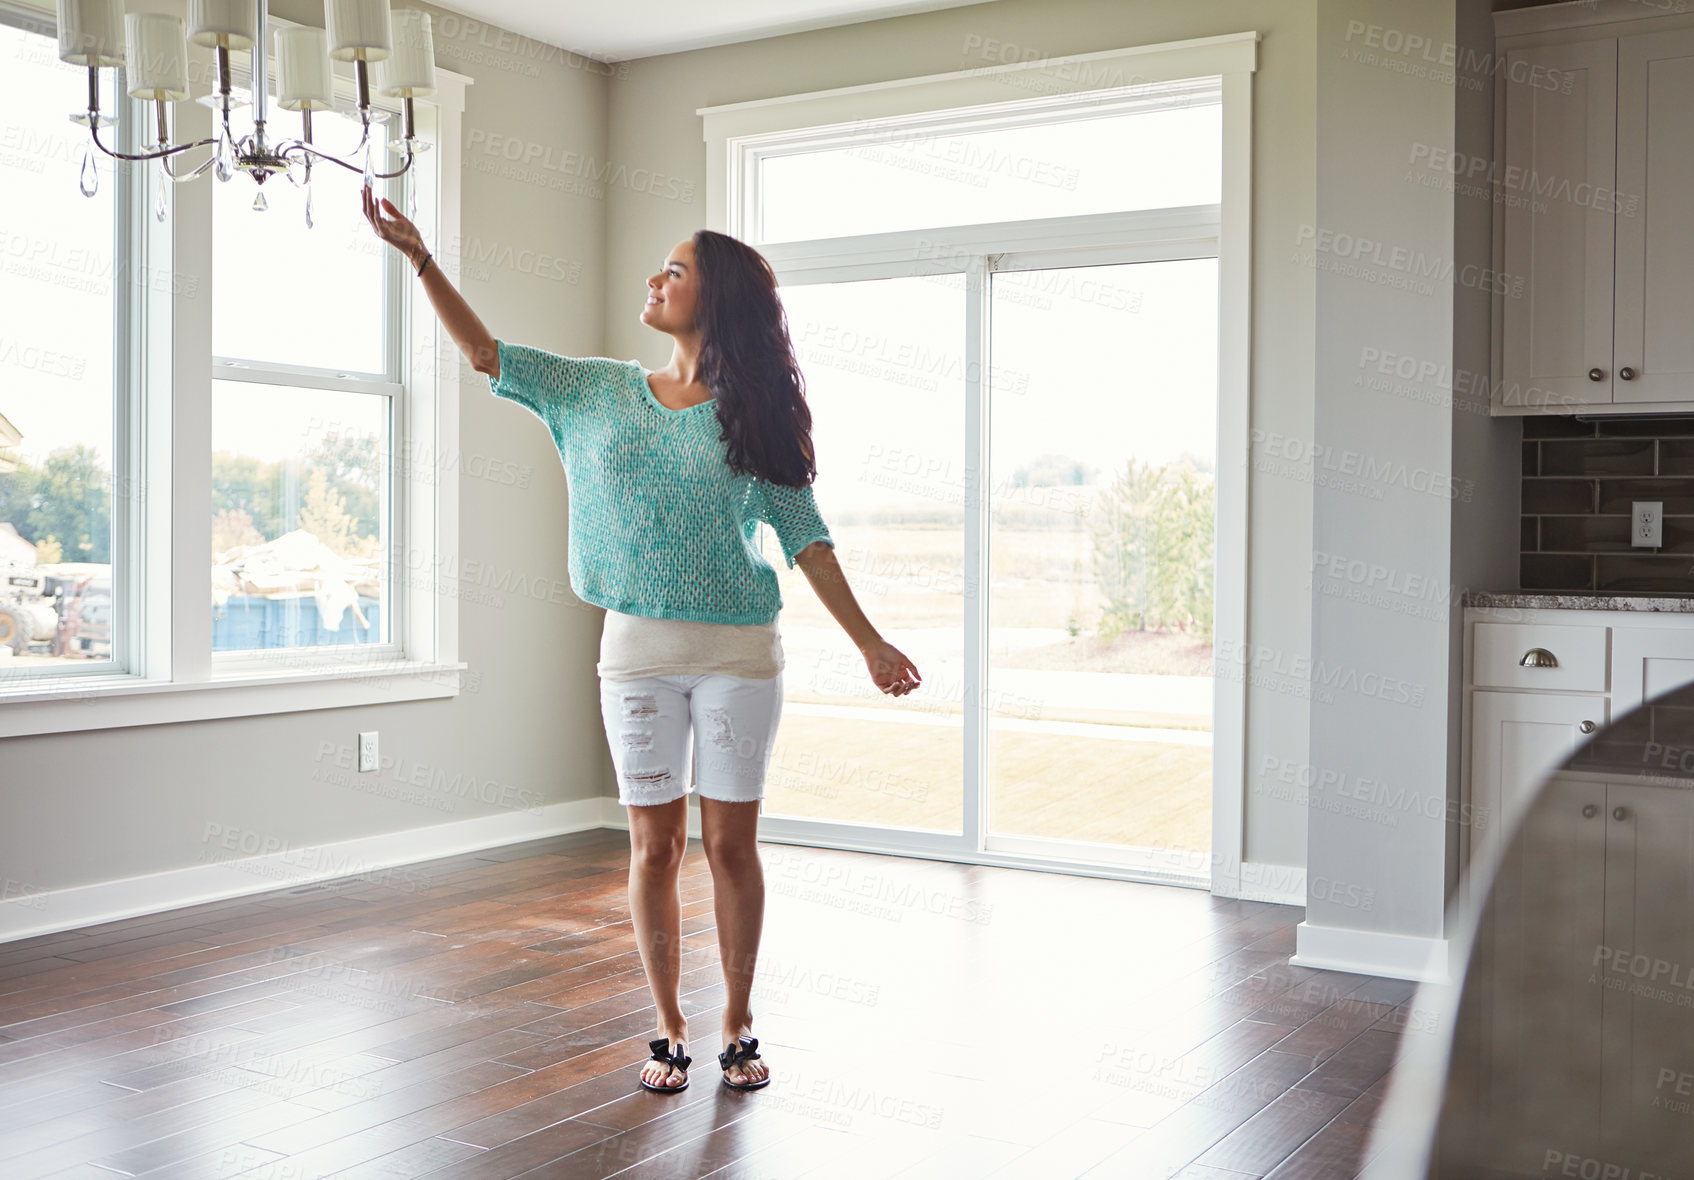 Buy stock photo Shot of a woman moving into her new home